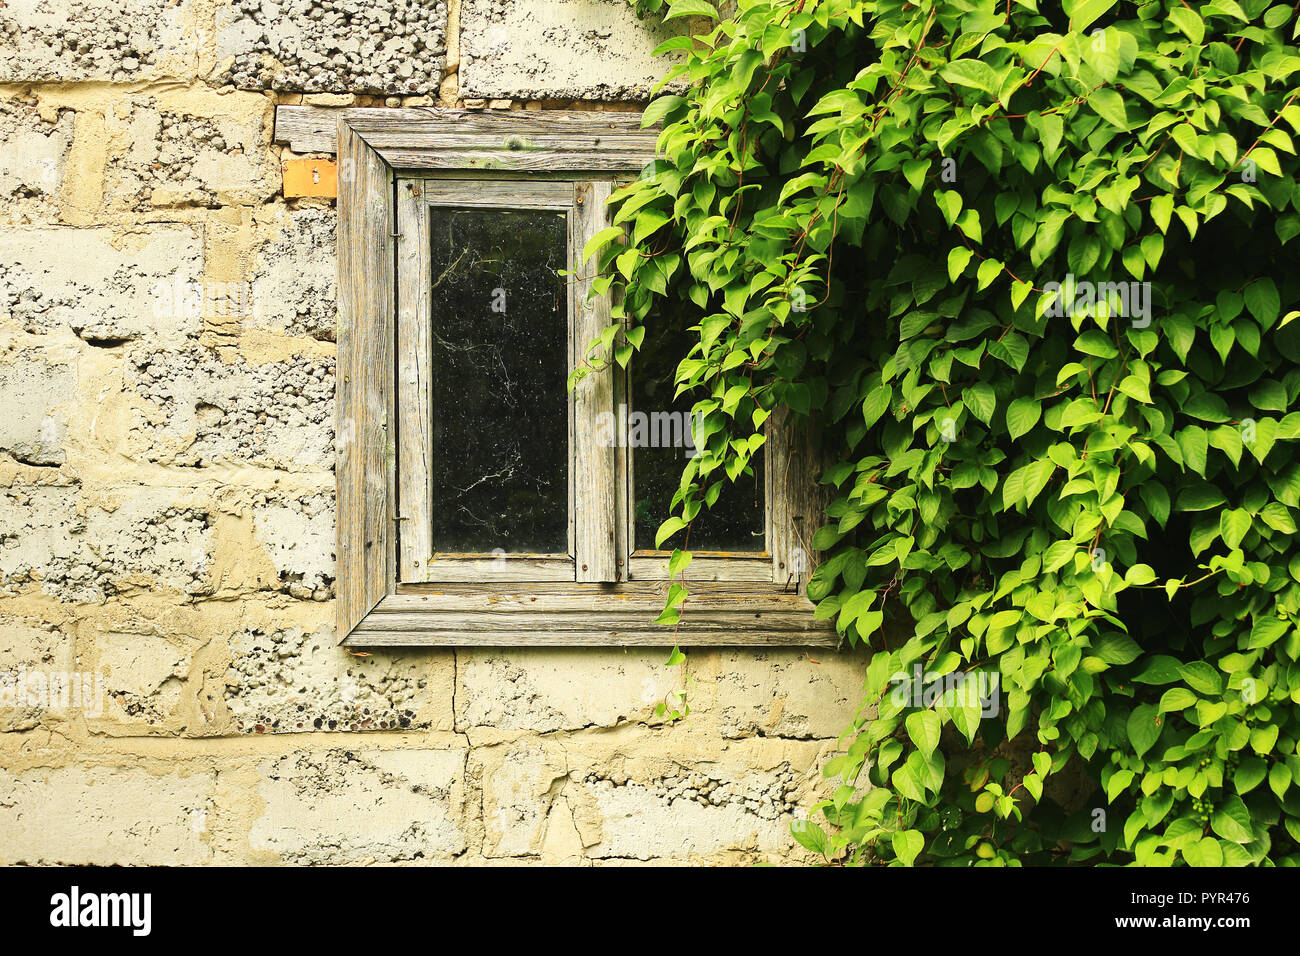 Old wooden window framed by green leaves of a climbing plant Stock Photo